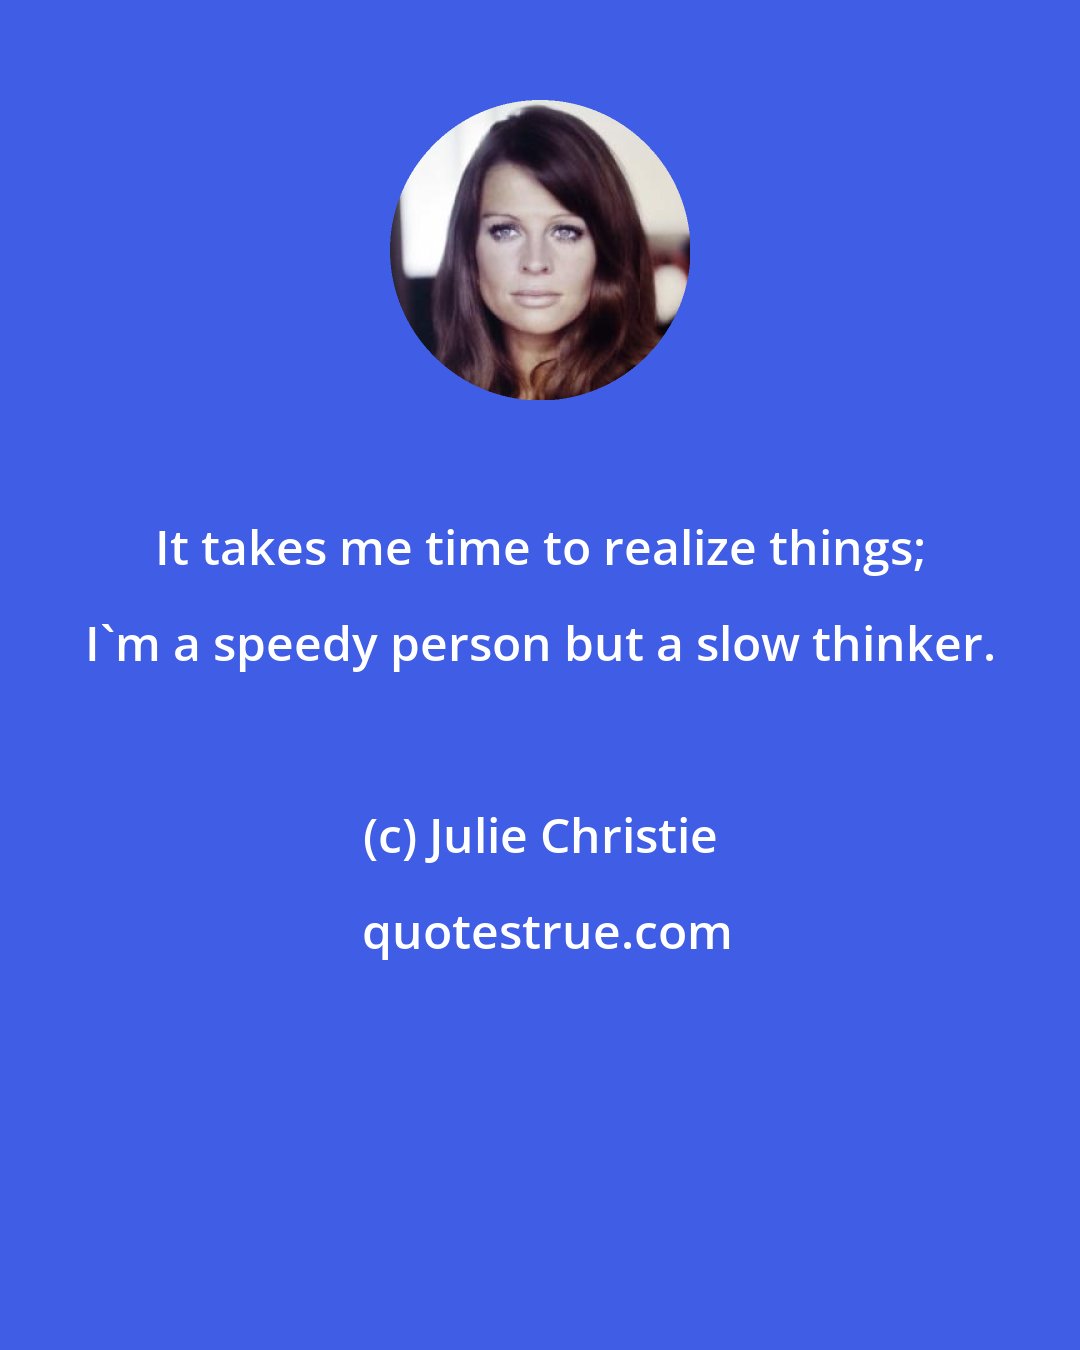 Julie Christie: It takes me time to realize things; I'm a speedy person but a slow thinker.